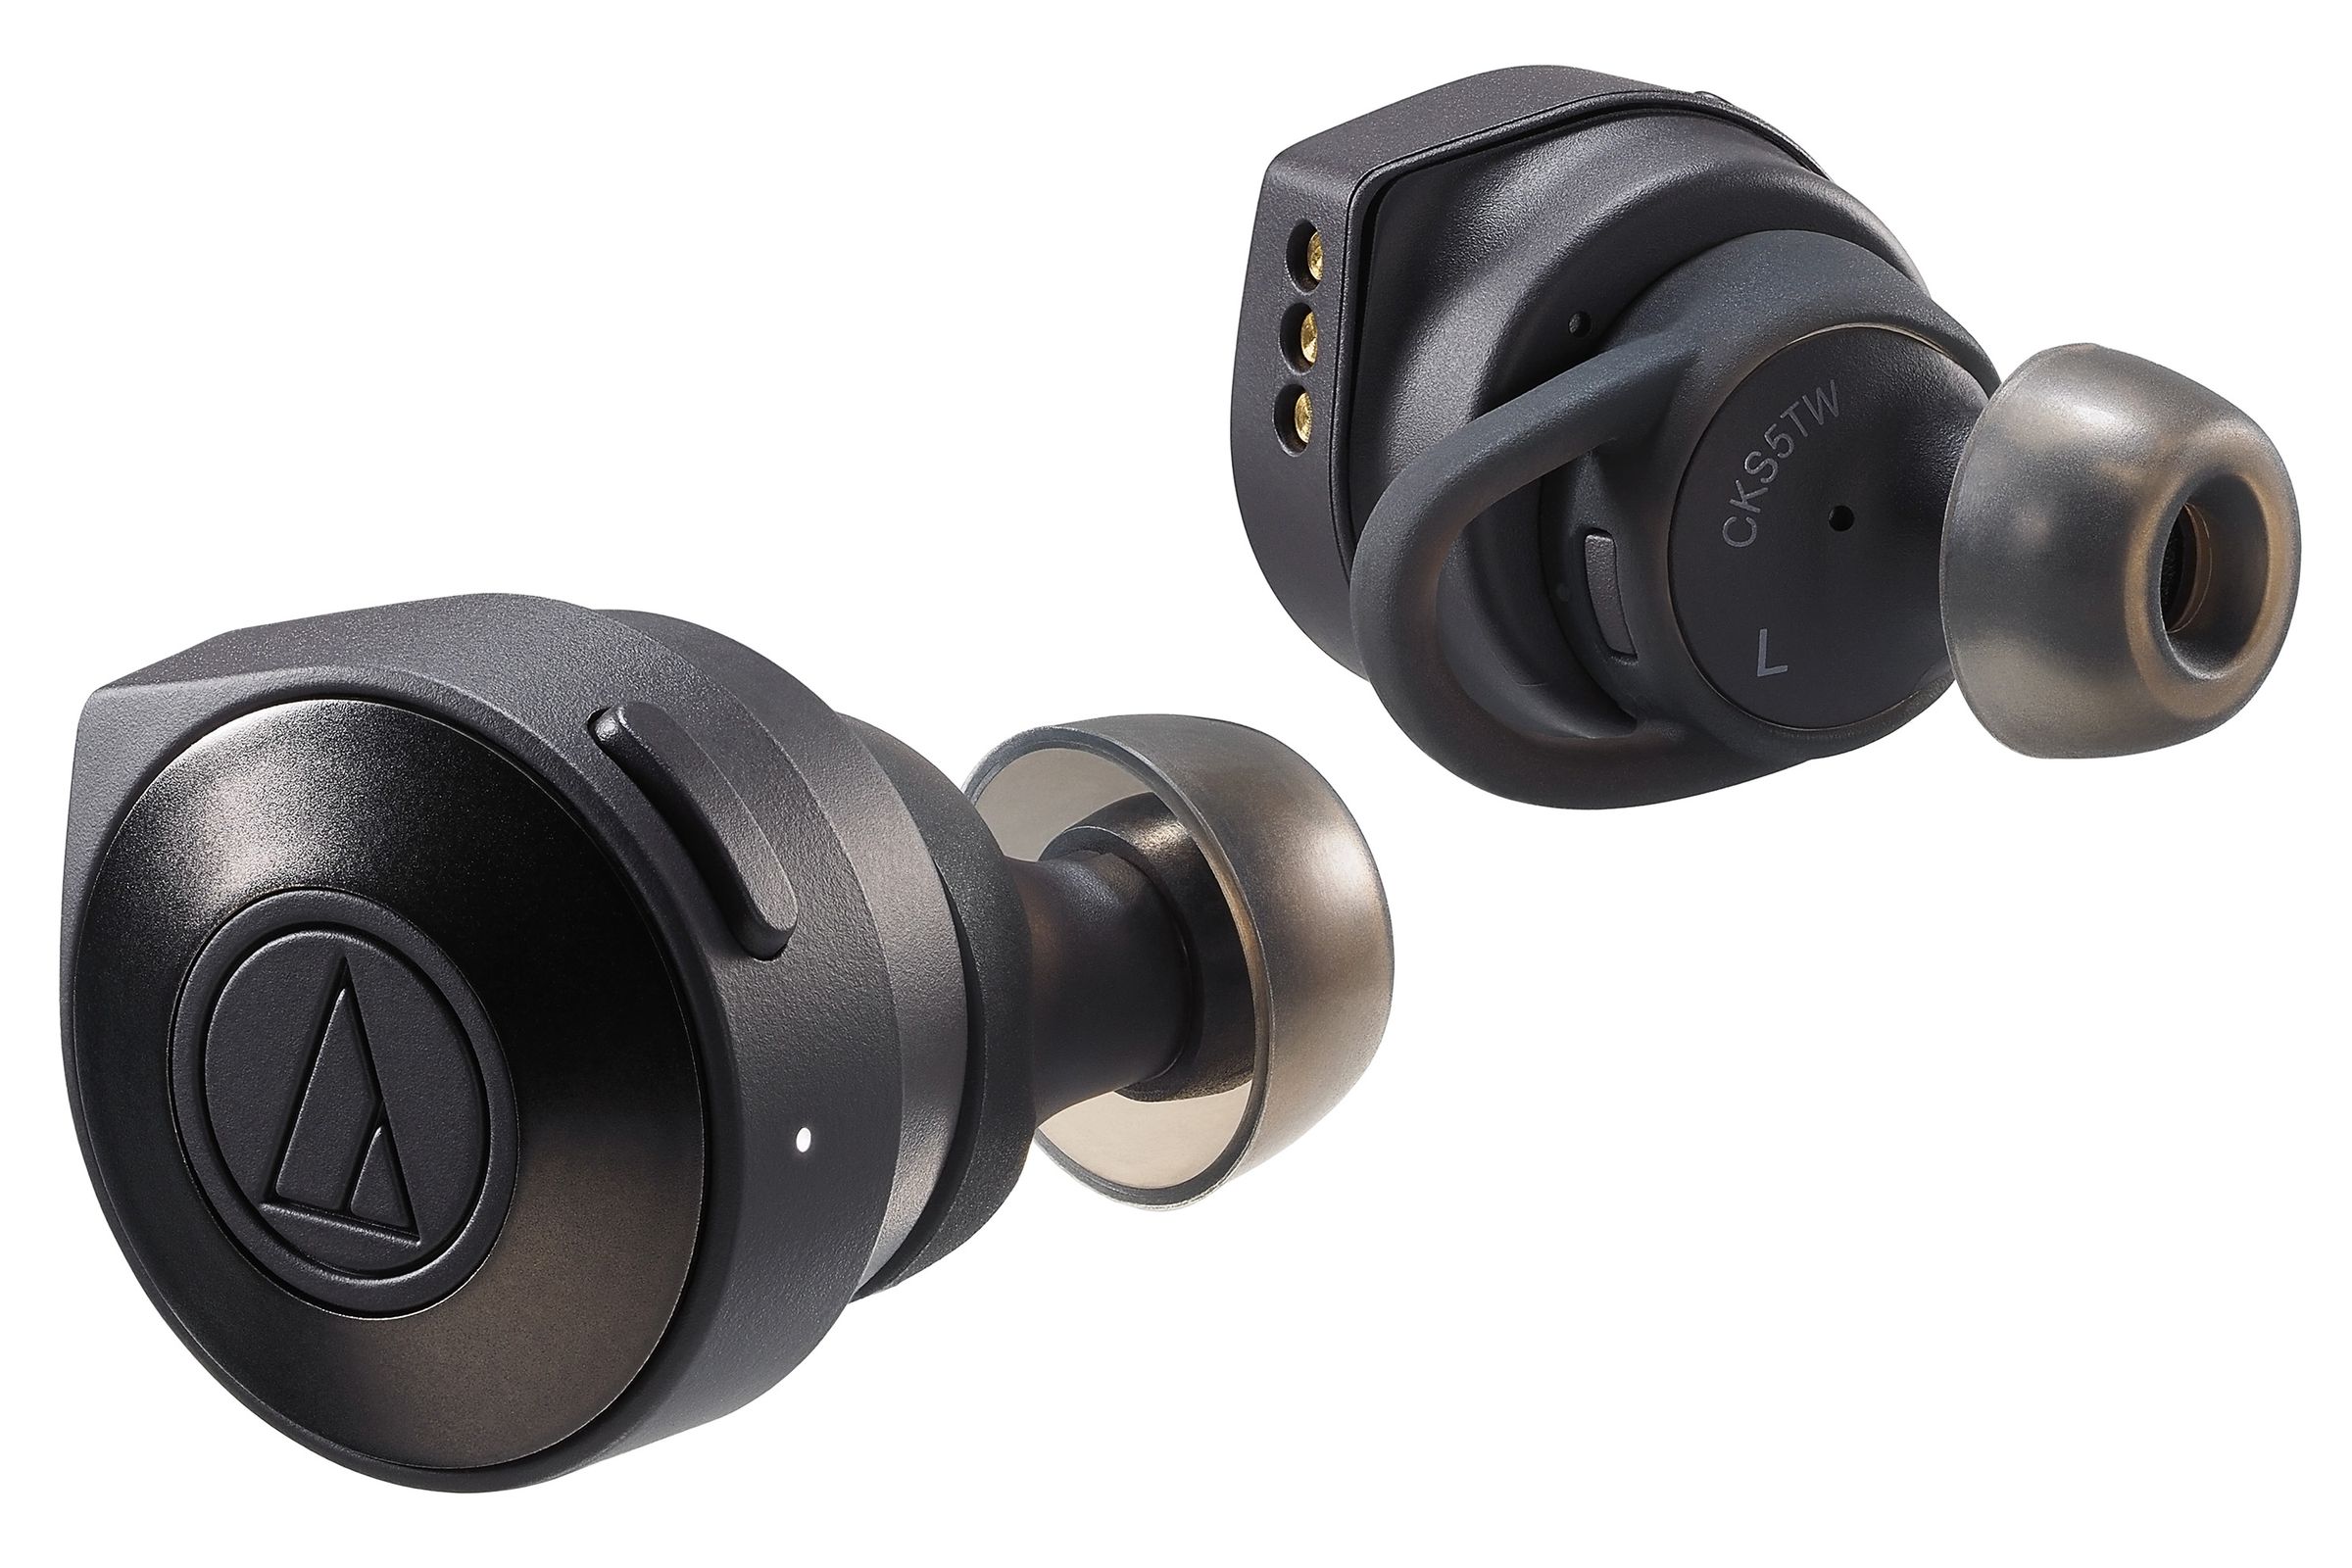 The ATH-CKS5TW include a physical button on each earbud.